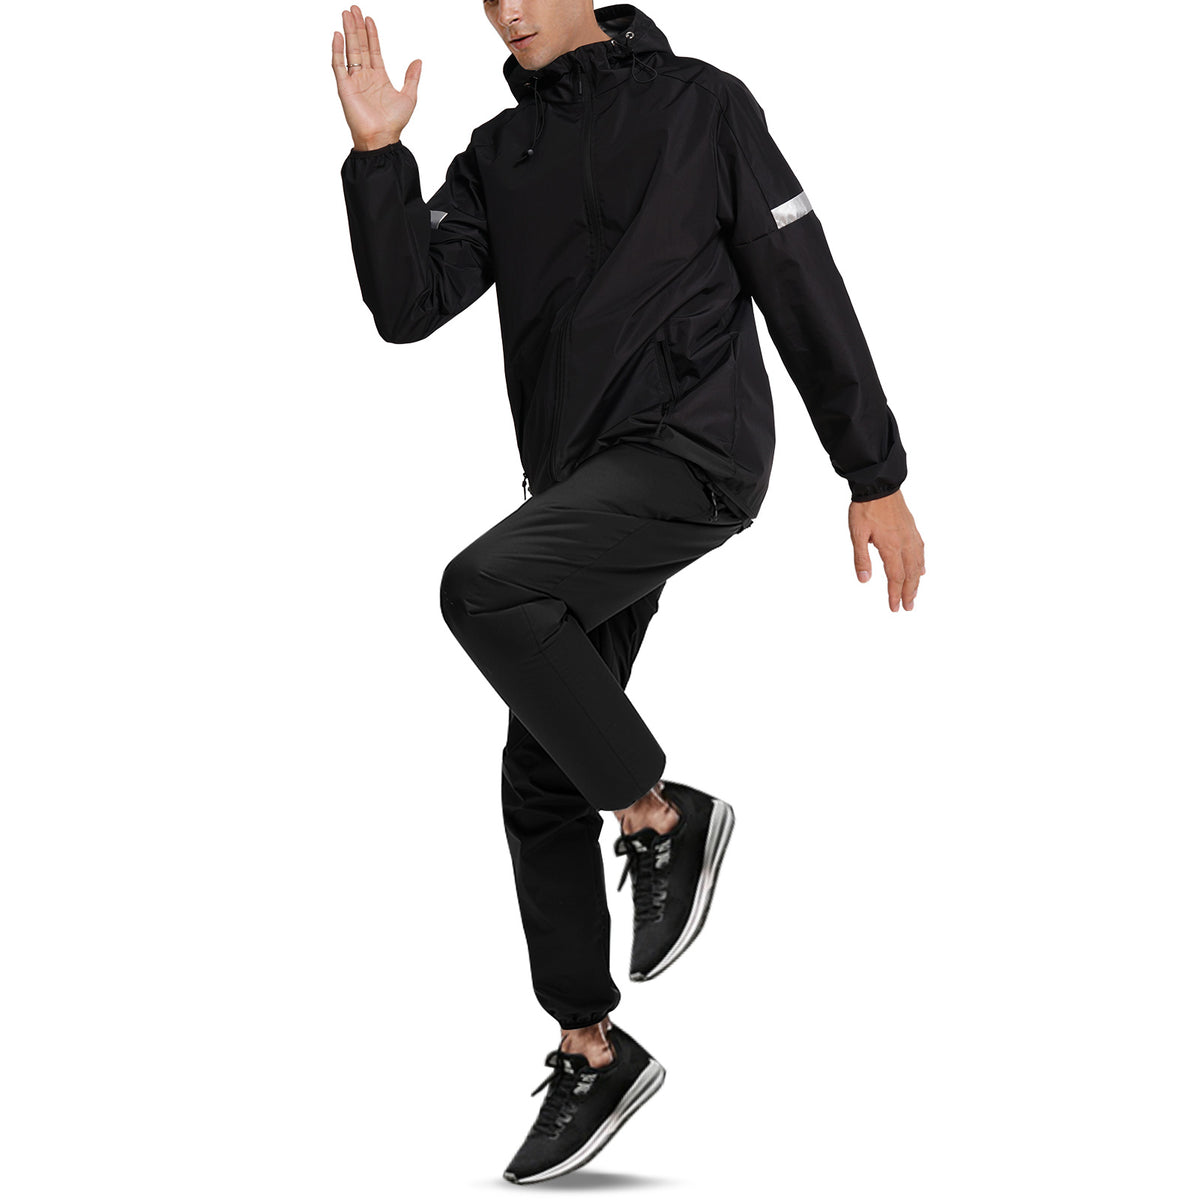 Black Men's Long Sleeve Hot Sauna Hoodies Jacket Suit For Sweating And Fat Burning - Nebility